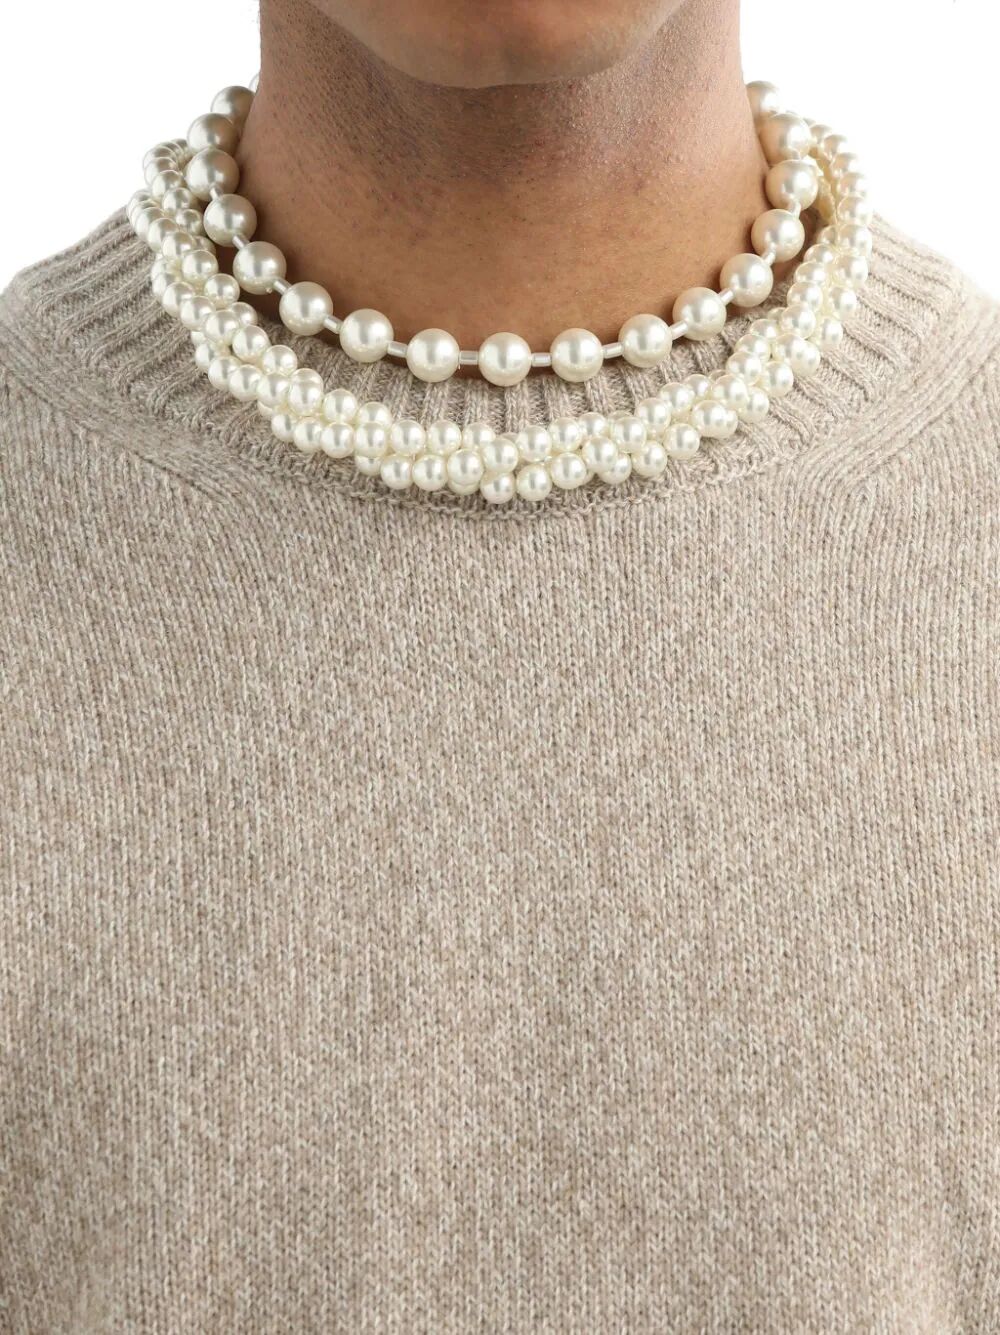 SIMONE ROCHA-DOUBLE TWISTED NECKLACE-NKS55 M 0904 PEARL